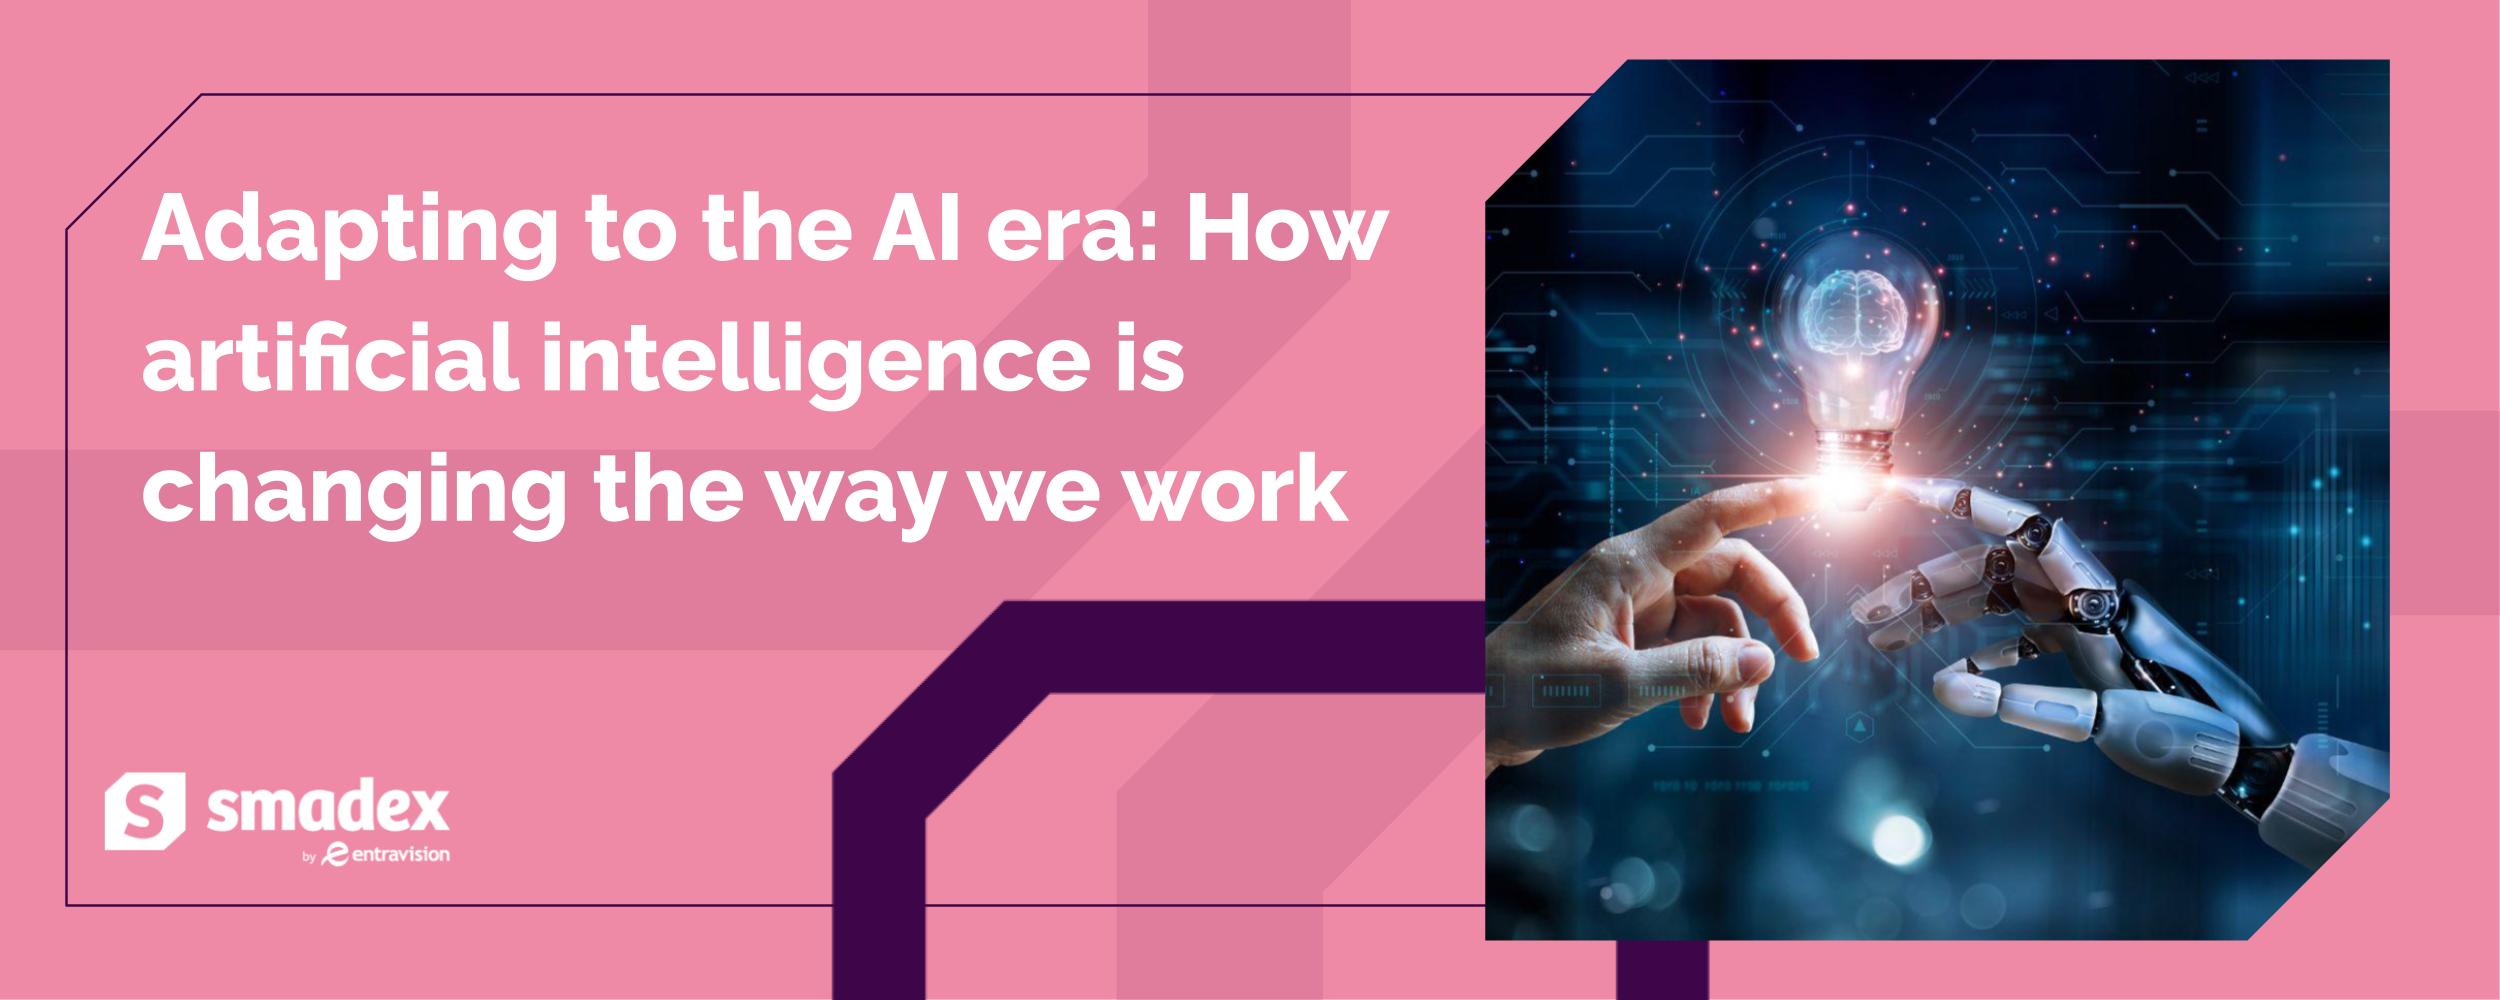 Adapting to the AI Era: How Artificial Intelligence is Changing the Way We Work